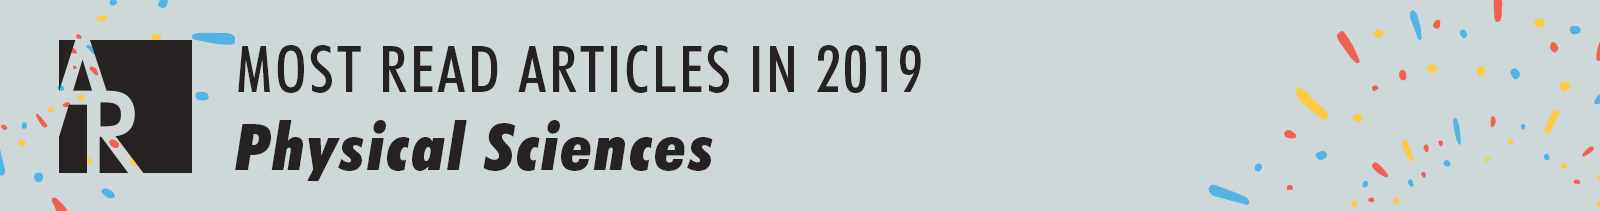 Top Read Articles 2019 - Physical Sciences